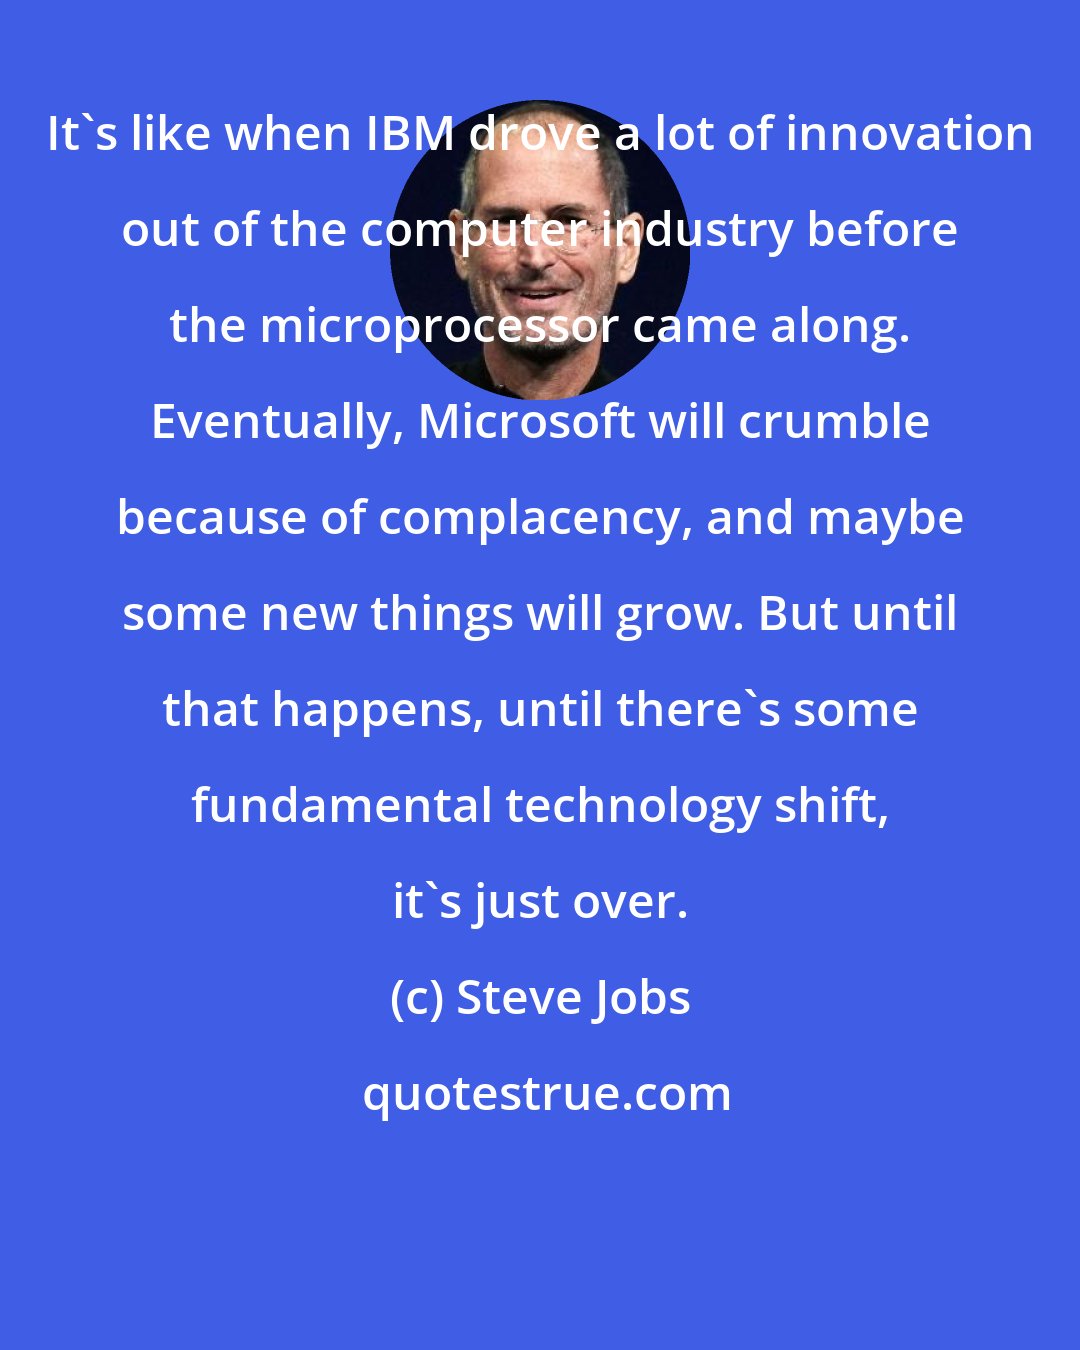 Steve Jobs: It's like when IBM drove a lot of innovation out of the computer industry before the microprocessor came along. Eventually, Microsoft will crumble because of complacency, and maybe some new things will grow. But until that happens, until there's some fundamental technology shift, it's just over.